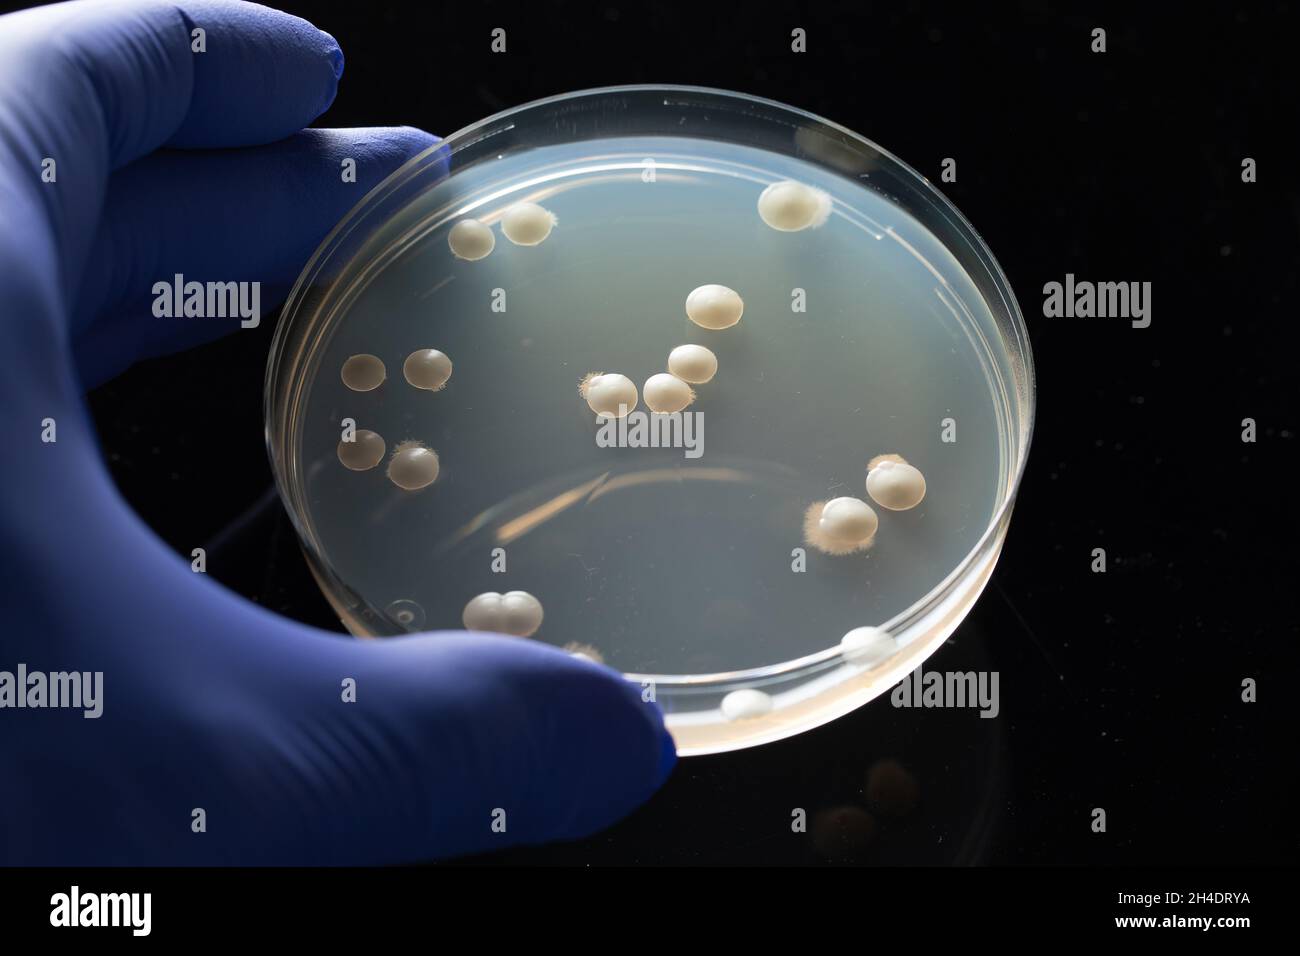 Scientist hand with blue glove holding a petri dish with bacteri Stock Photo